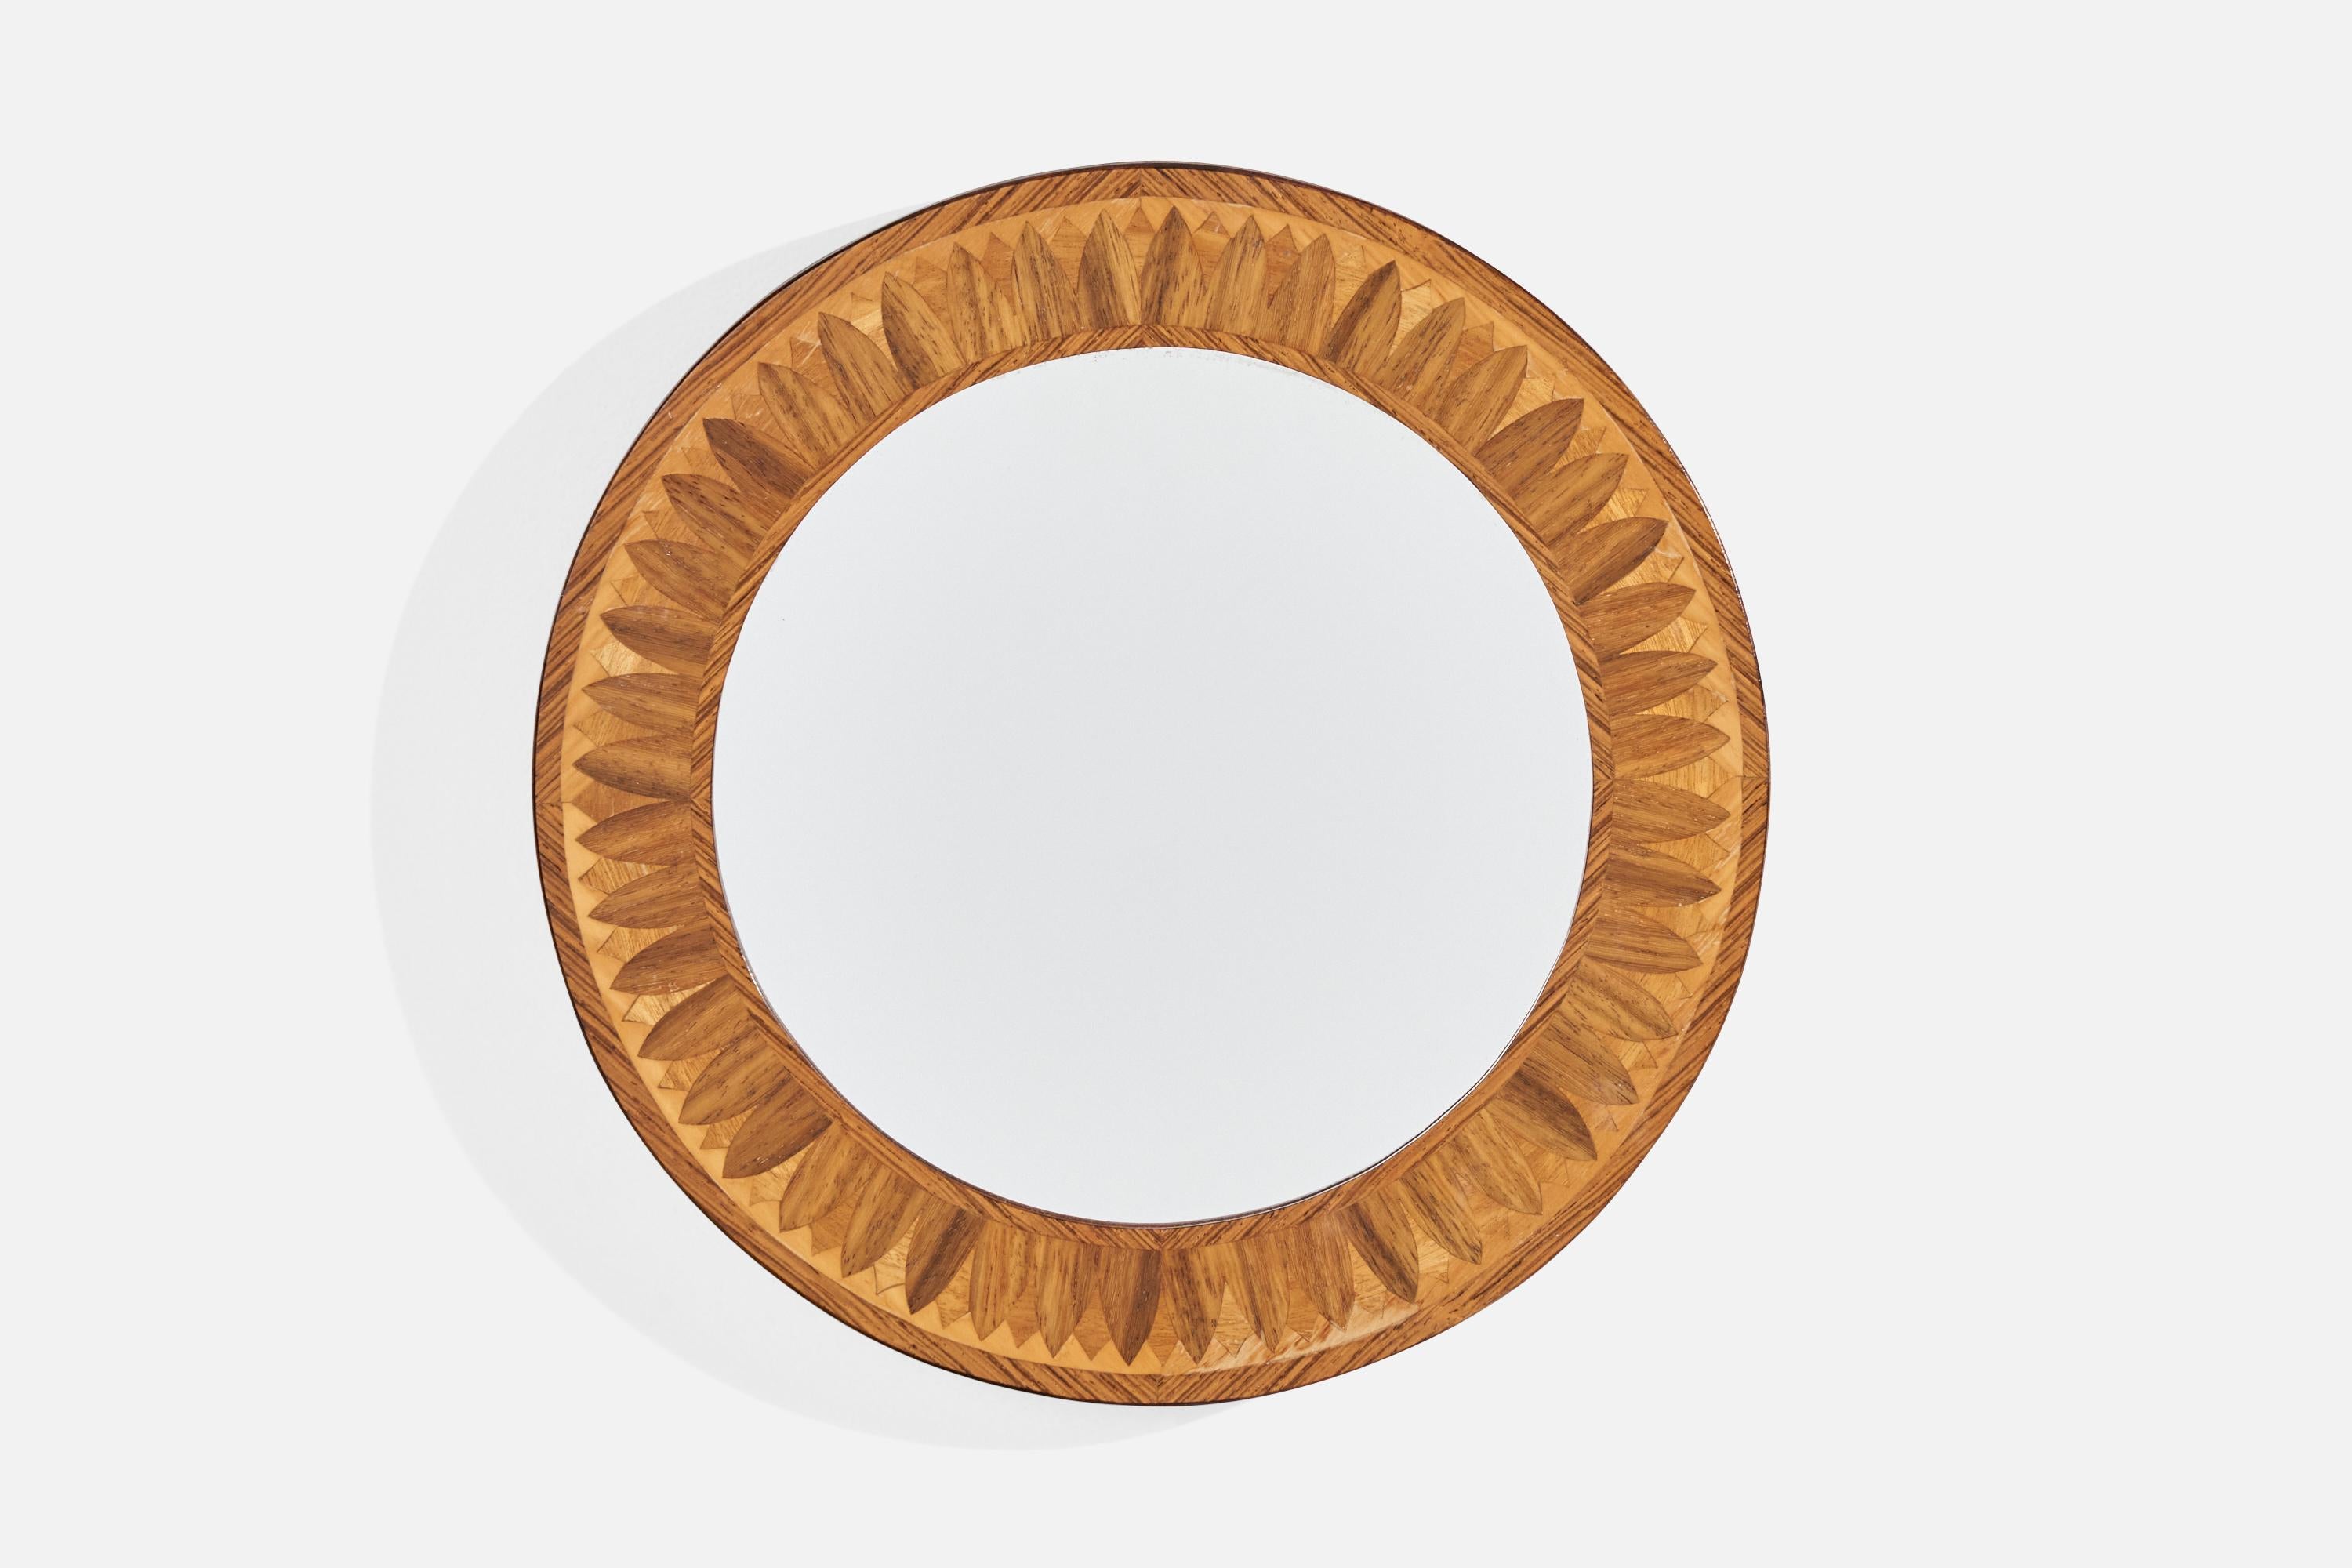 A wood inlay mirror designed and produced in Sweden, c. 1940s.